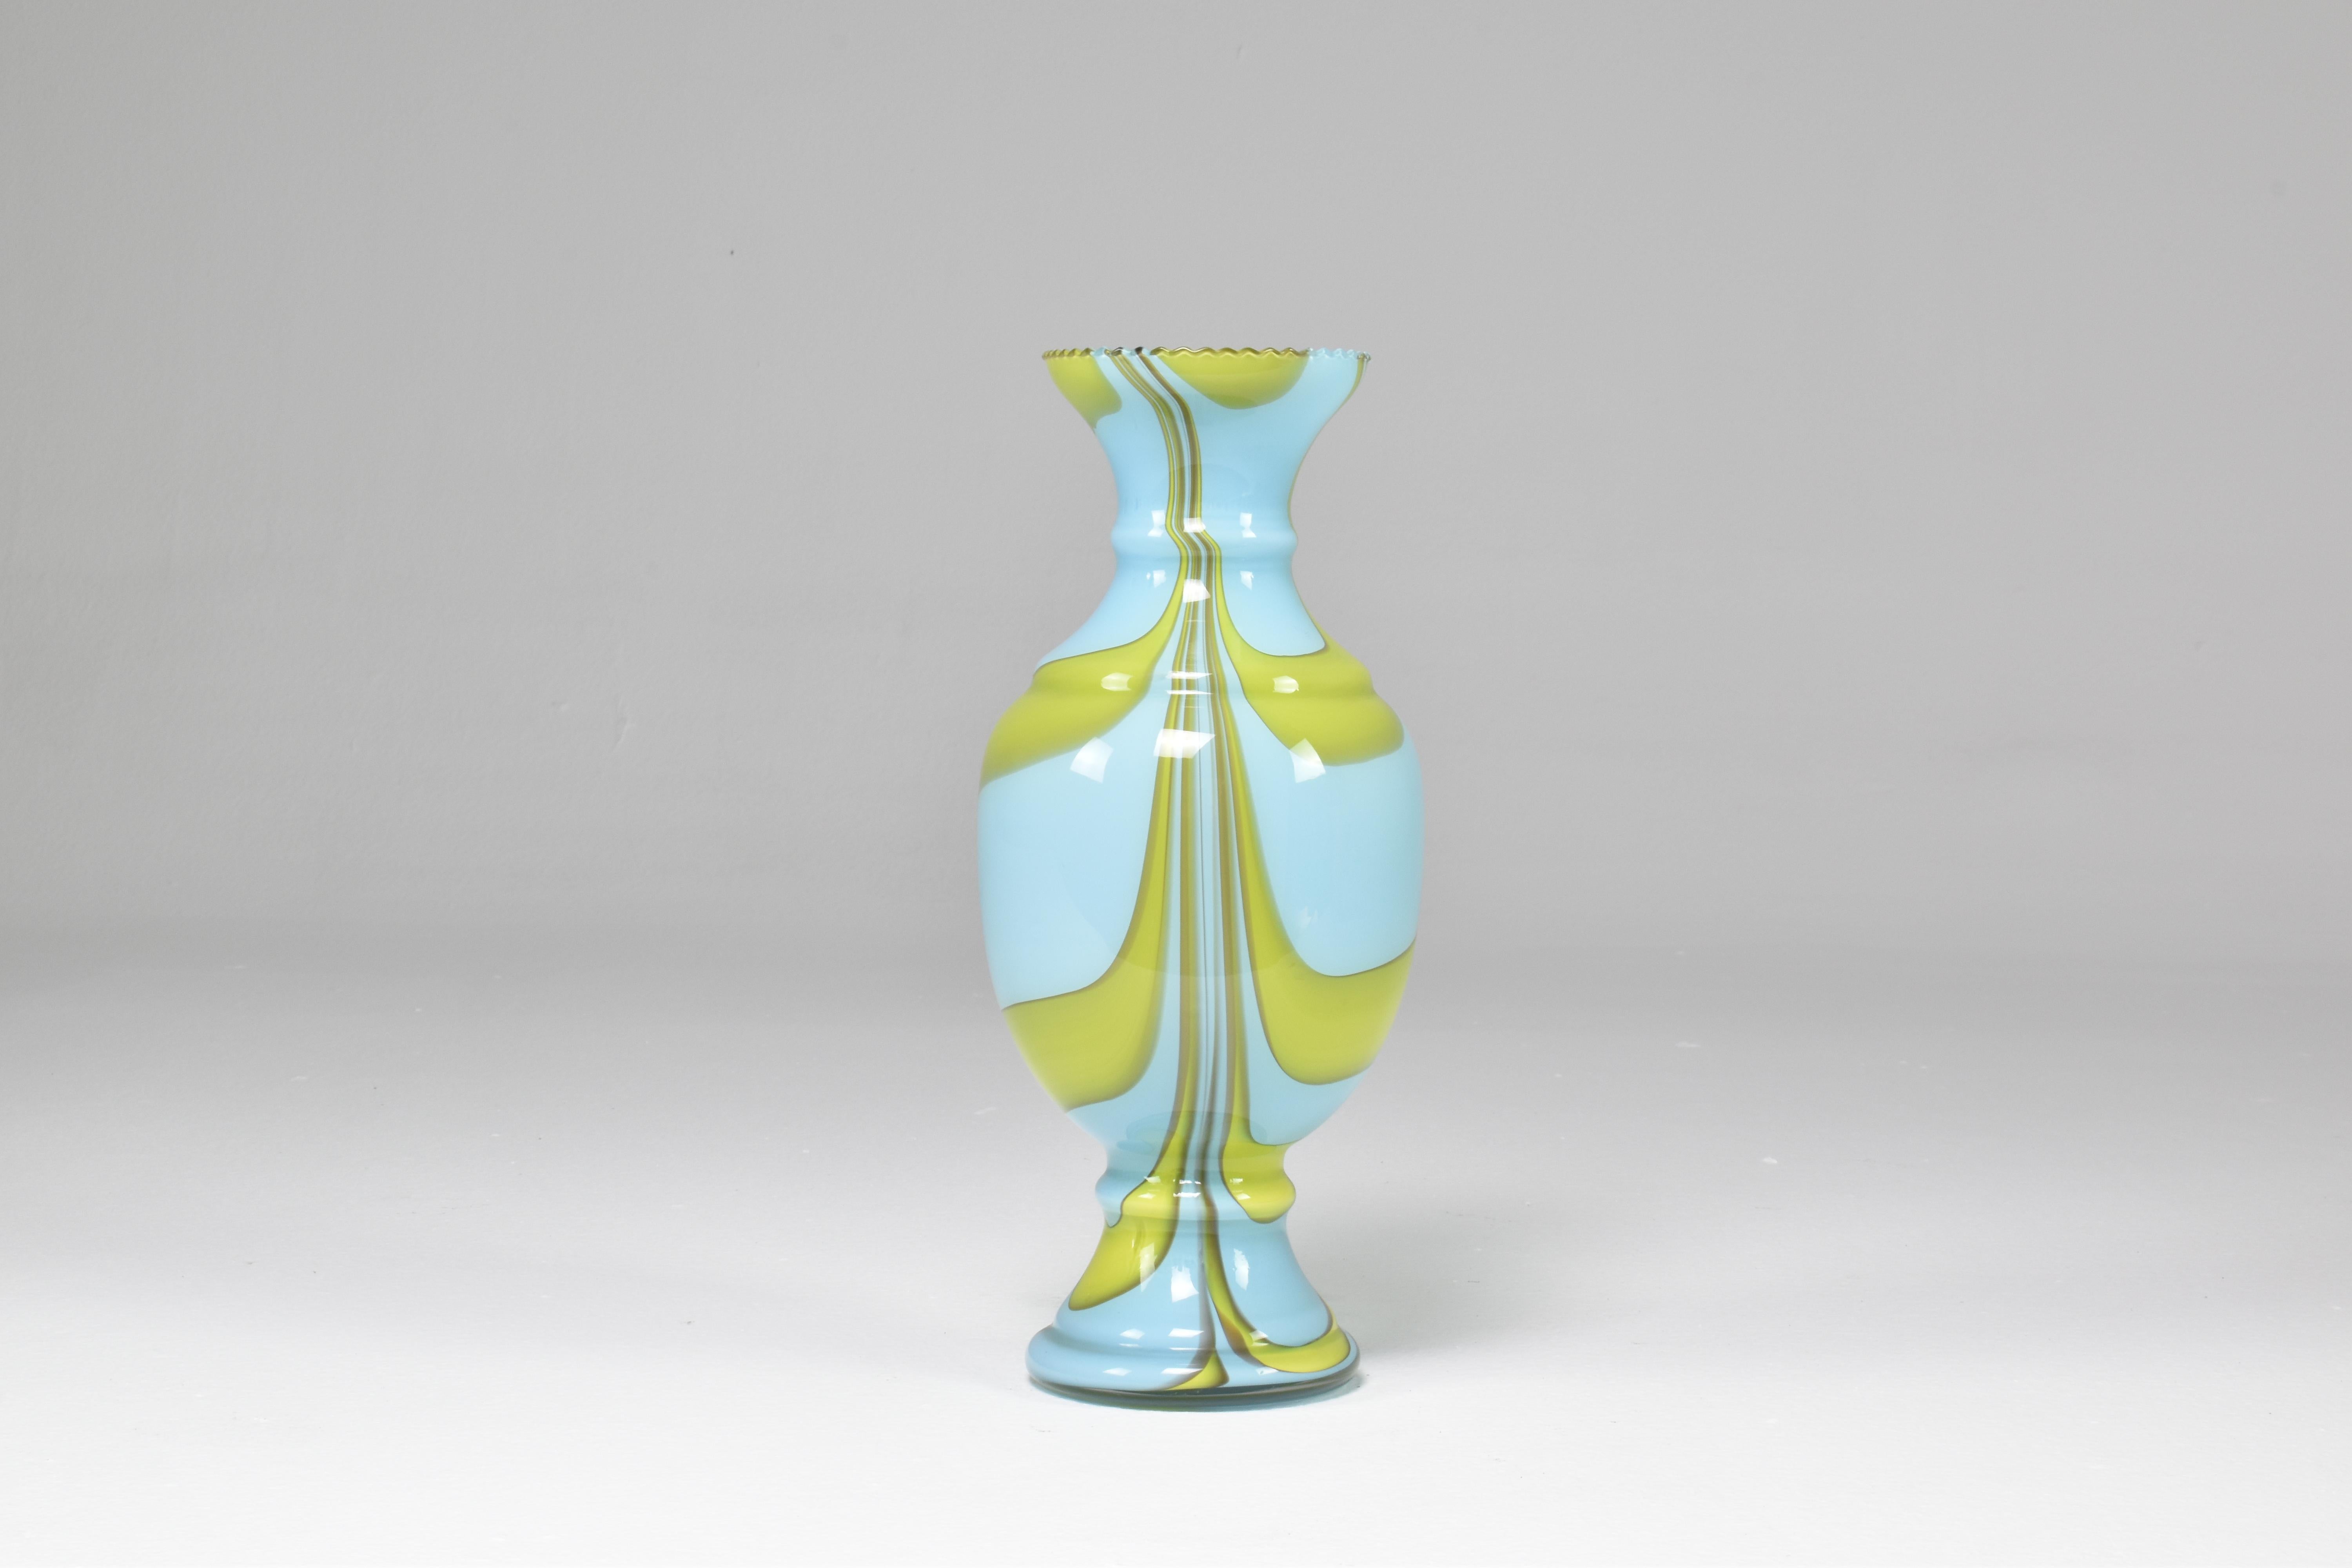 Elegant 1960's Italian hand-blown glass vase, crafted with the artistry of bold swirled Murano-style glass. 
It features gentle hues of light blue and soft green, expertly blended together. This piece is designed in the form of a timeless antique